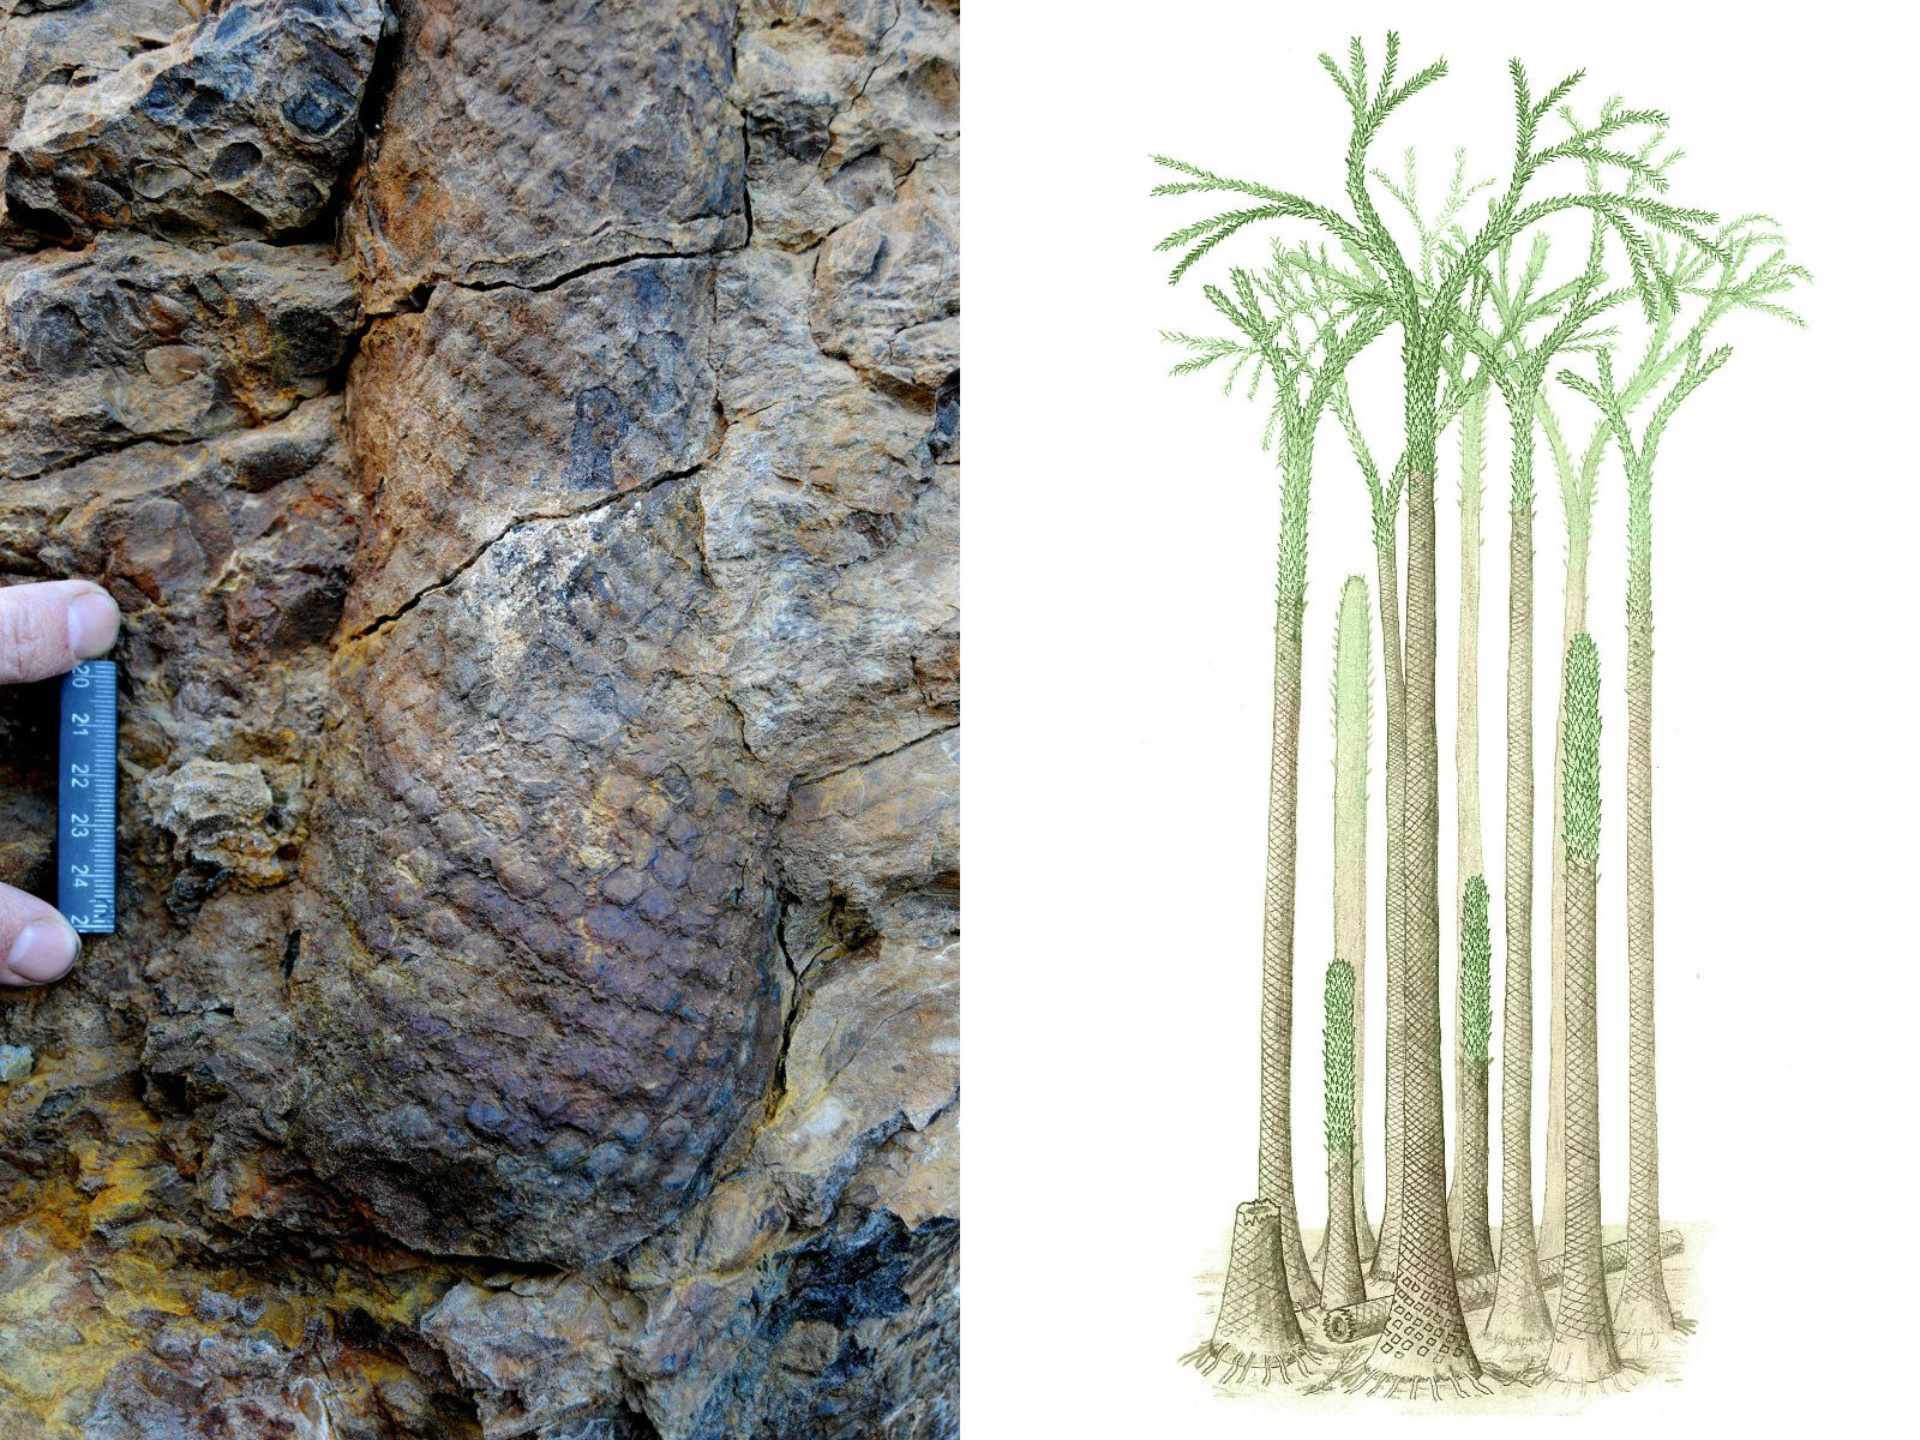 Partial tree trunk with the base preserved, at the site in Svalbard (left) and a reconstruction of what the ancient forest look liked 380 million years ago (right)